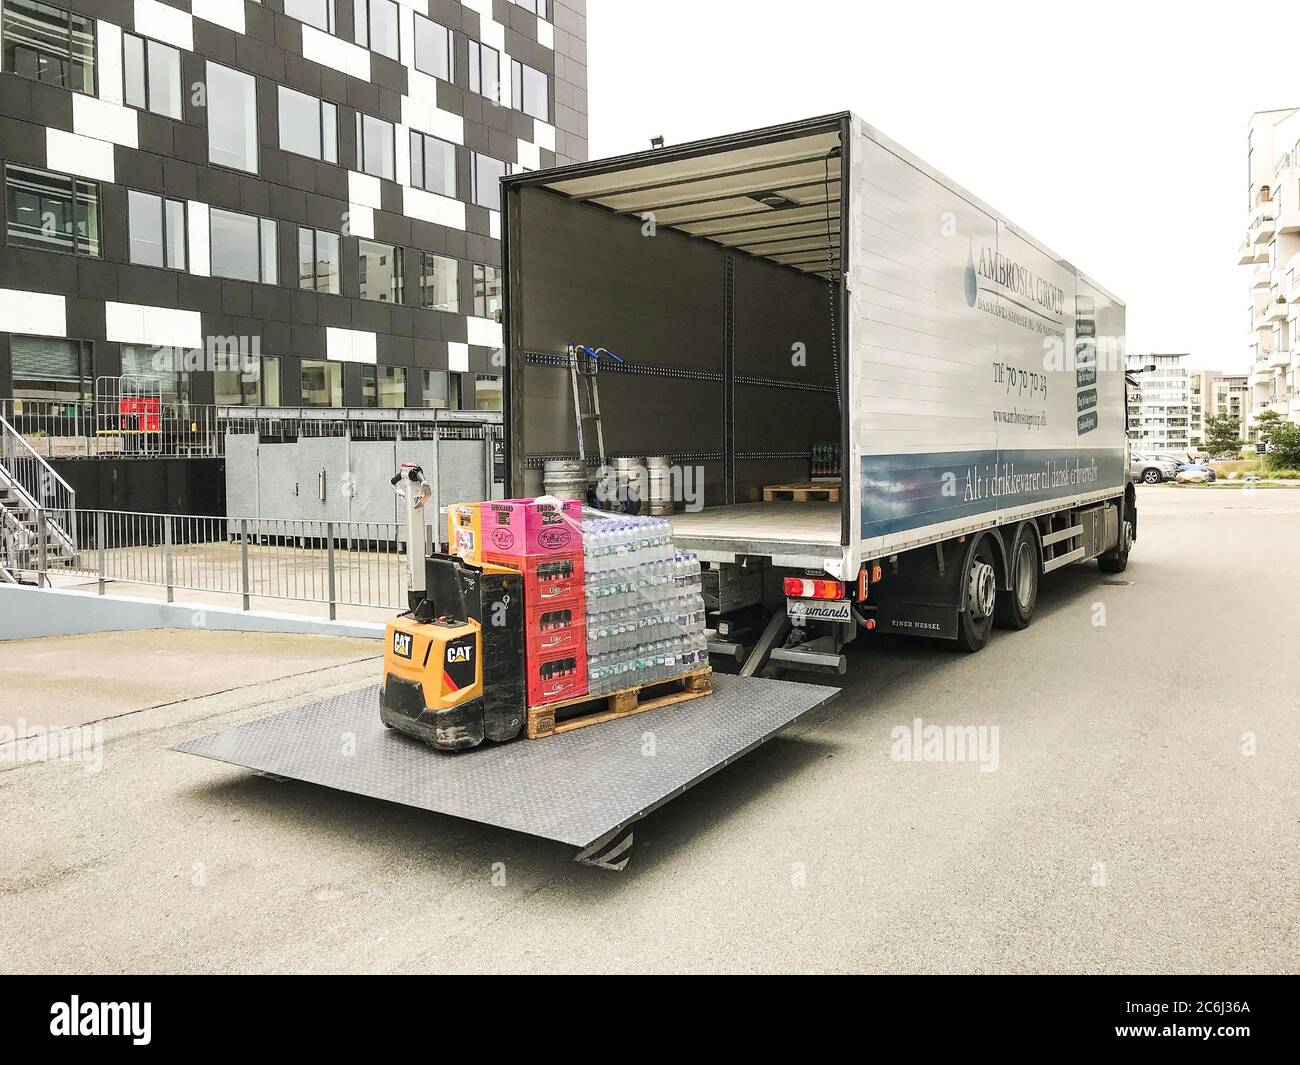 Beverages Being Unloaded From A Forklift On A Tailgate Loader In The Back Of A Delivery Truck In Front Of An Office Building Copenhagen Denmark Ju Stock Photo Alamy